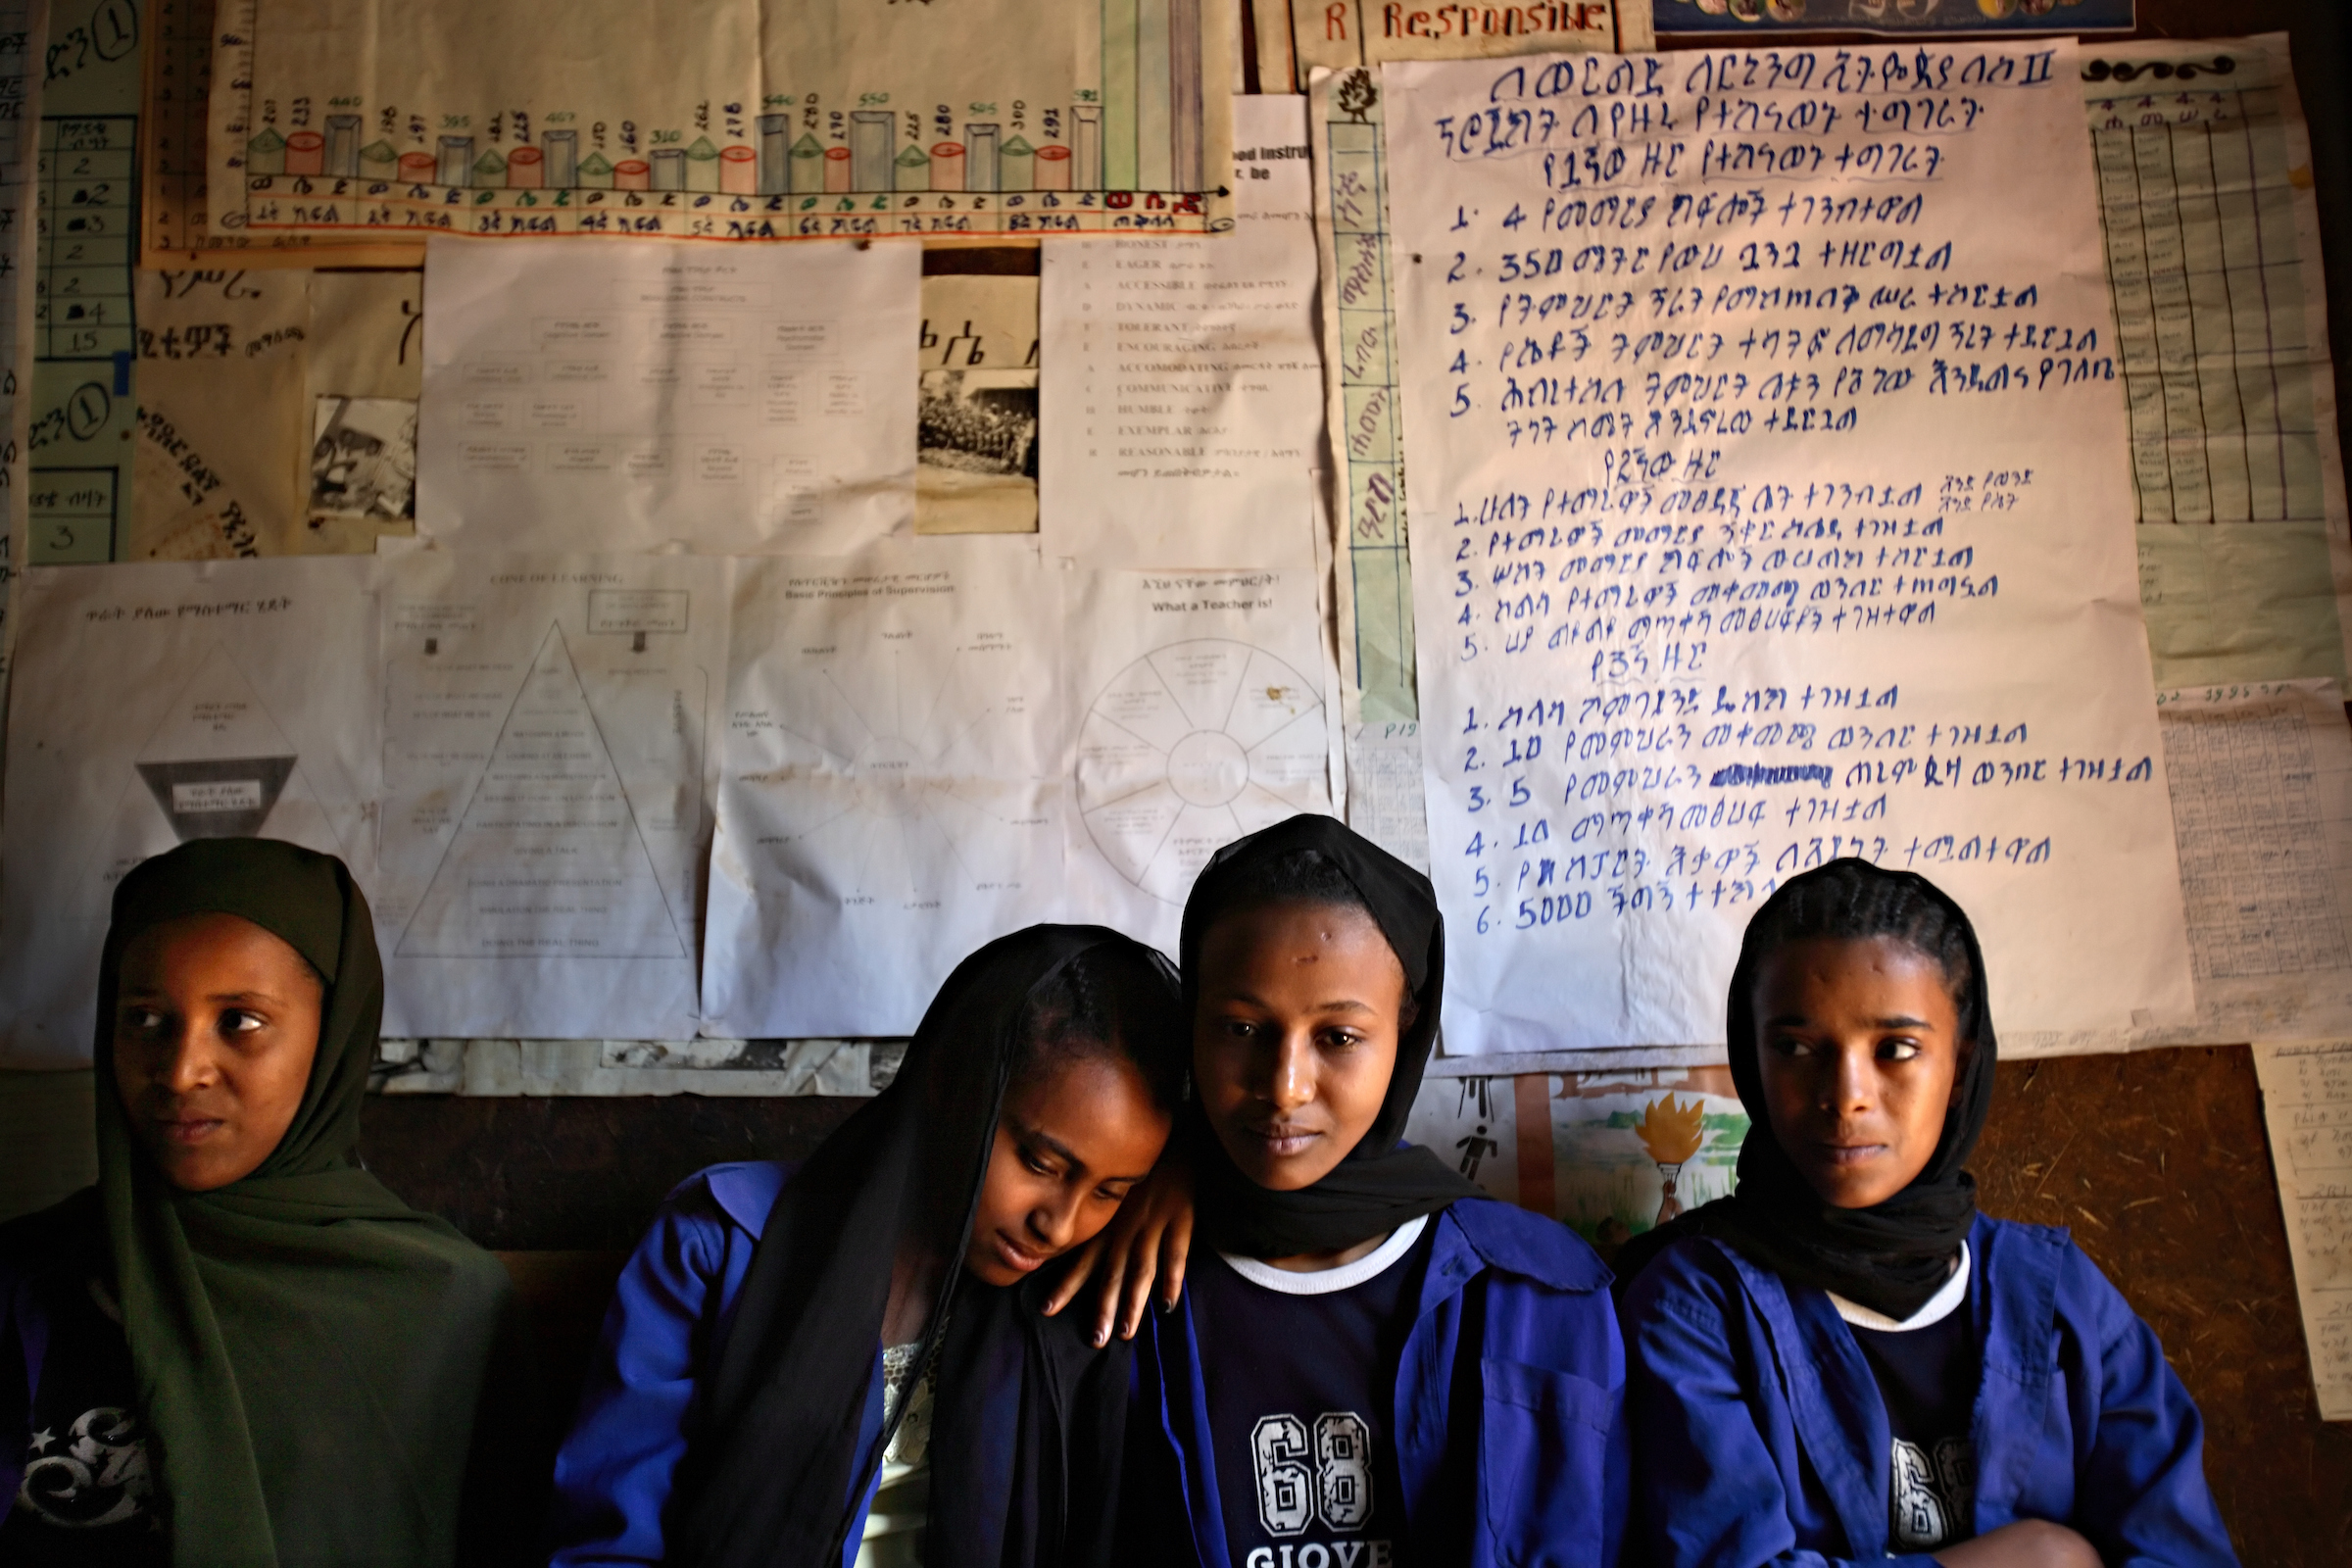 Four married and betrothed Muslim girls attend school near Bahir Dar, Ethiopia. Most married girls, who would like to continue their schooling, are often prevented from doing so.